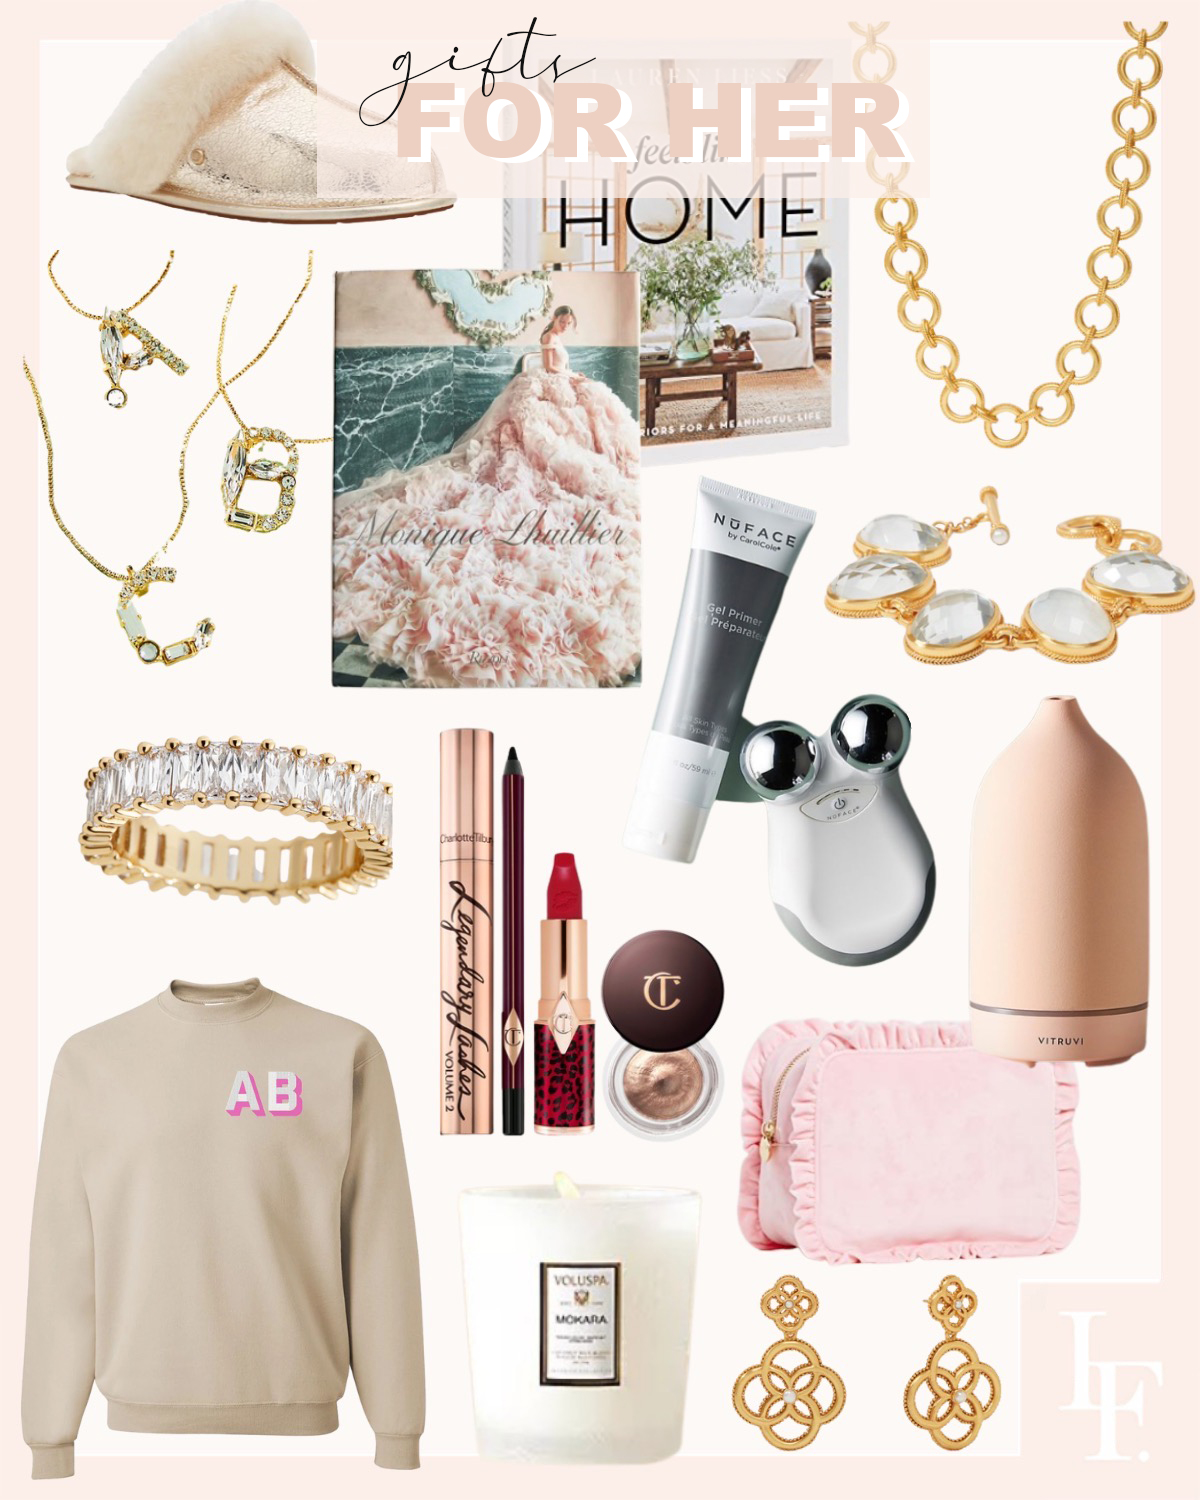 Gift guide 2021, the best gifts for her. Anthopologie, bauble bar, jcrew. By Lombard and Fifth, Veronica Levy.